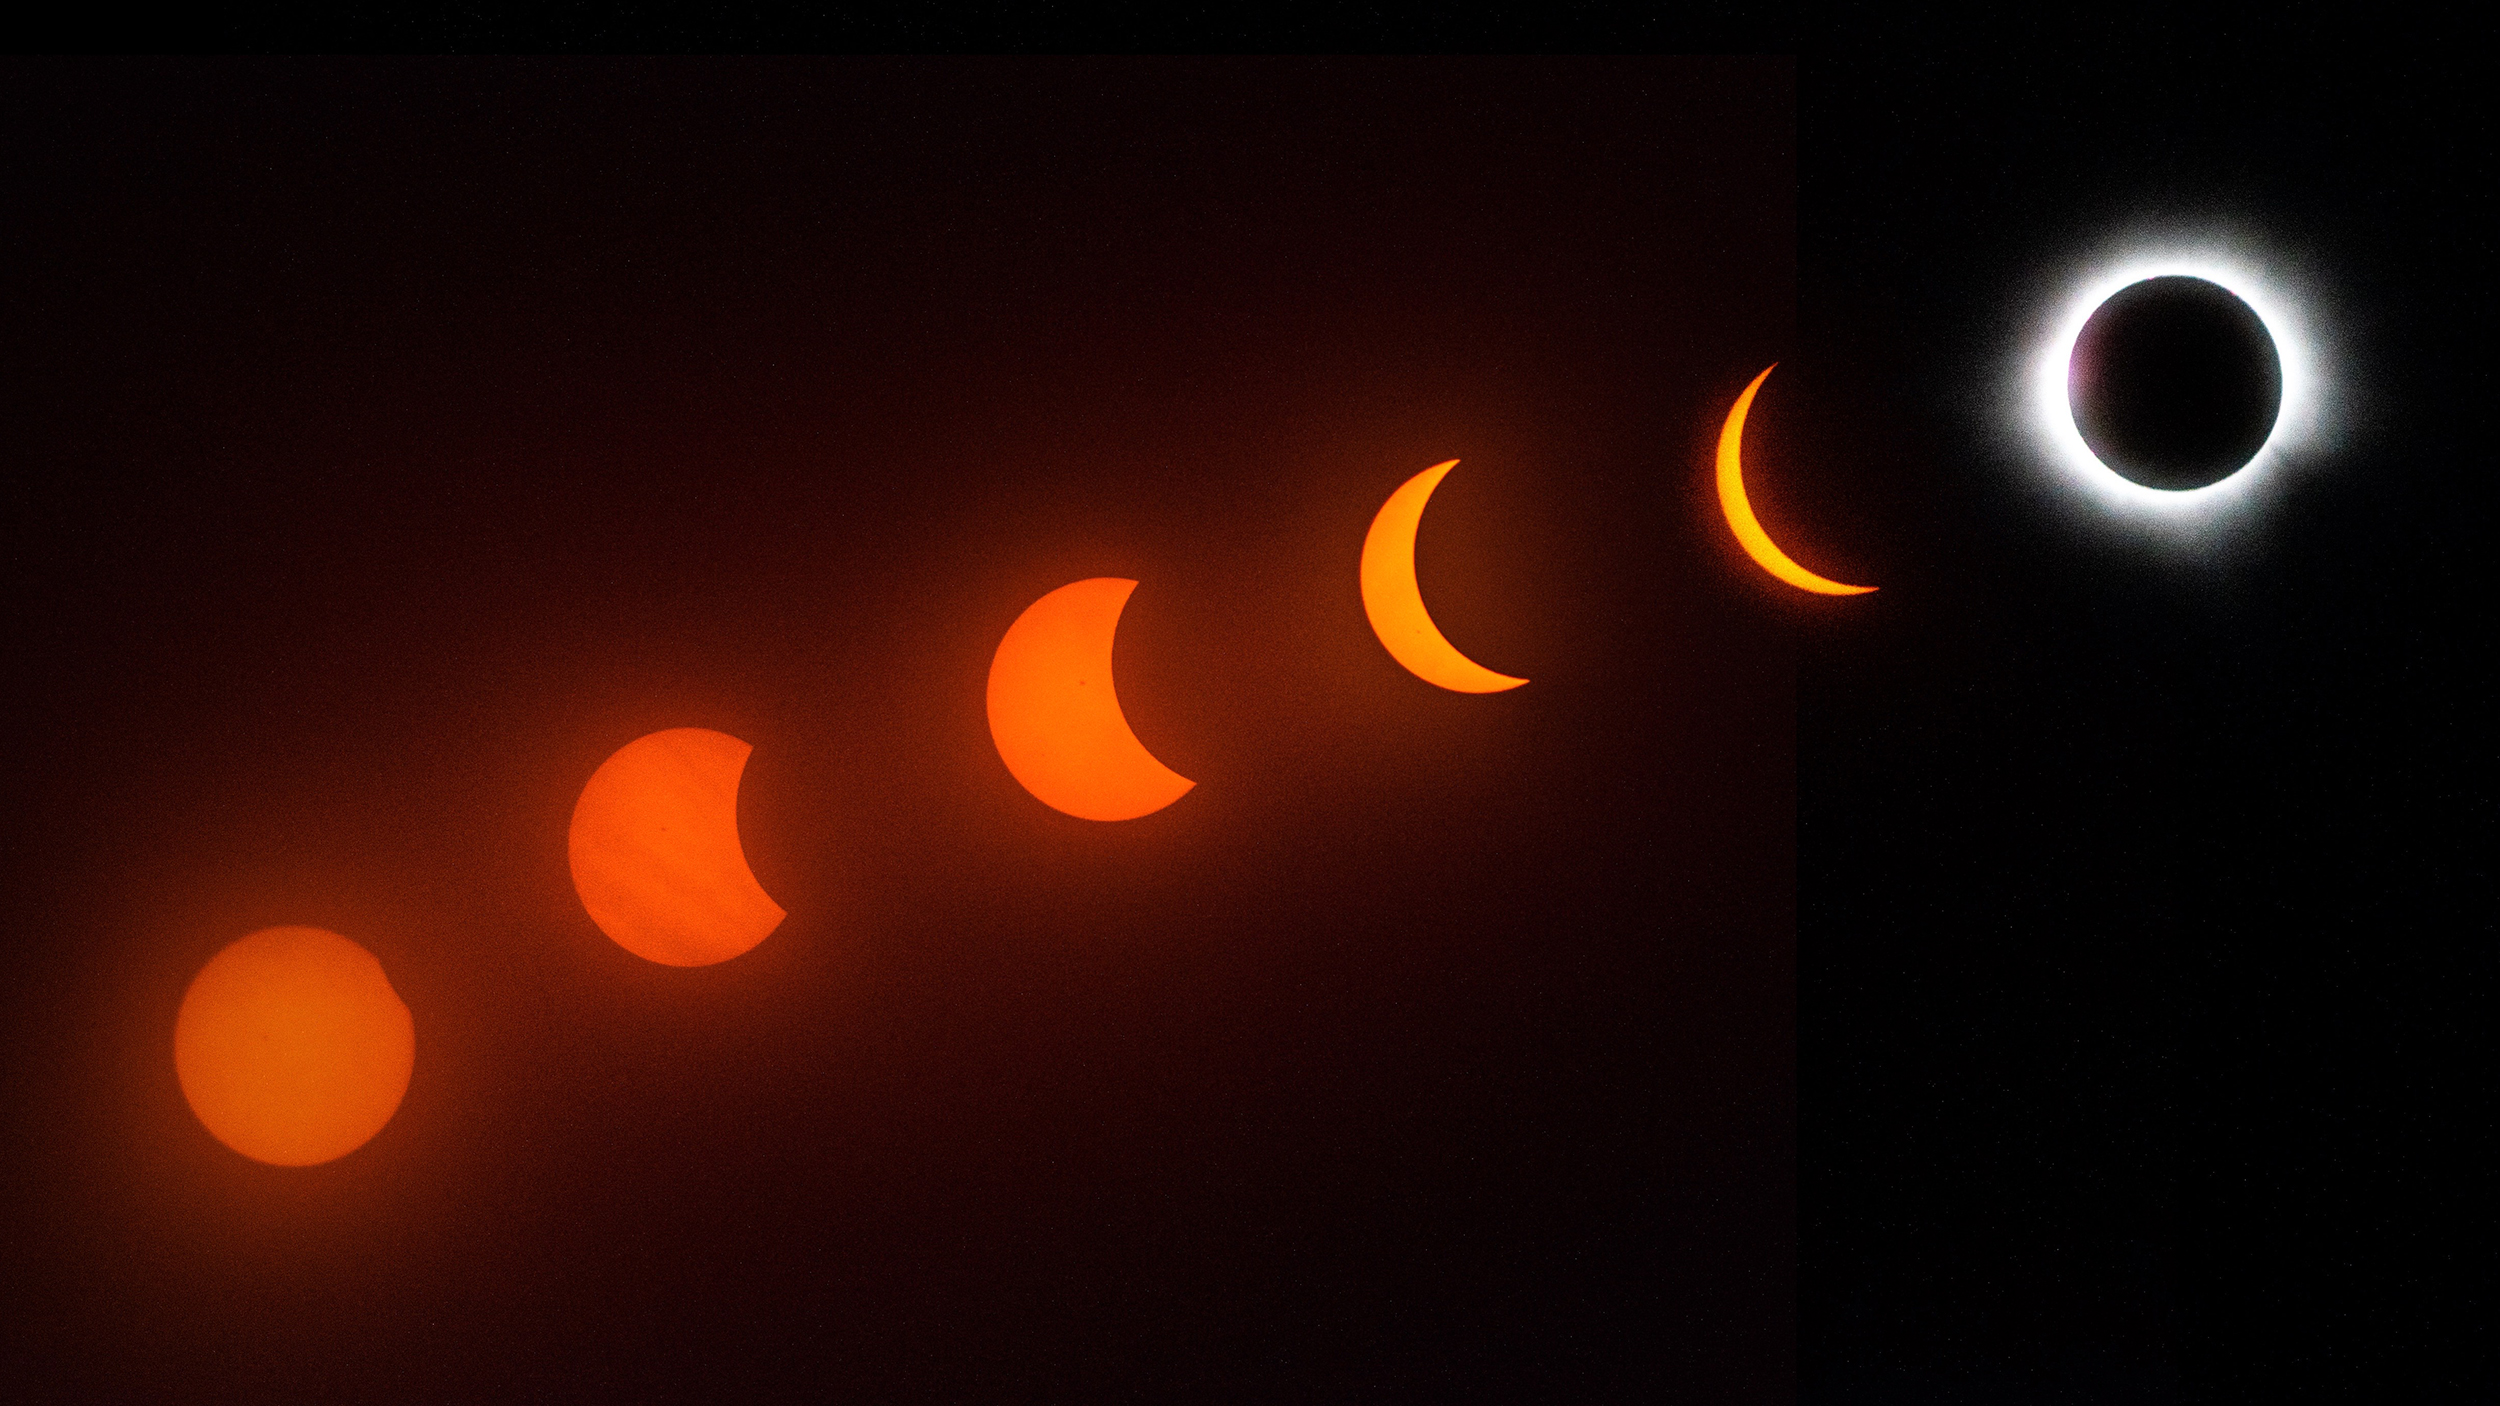 A sequence showing the phases of a solar eclipse, culminating in totality, against a dark background.